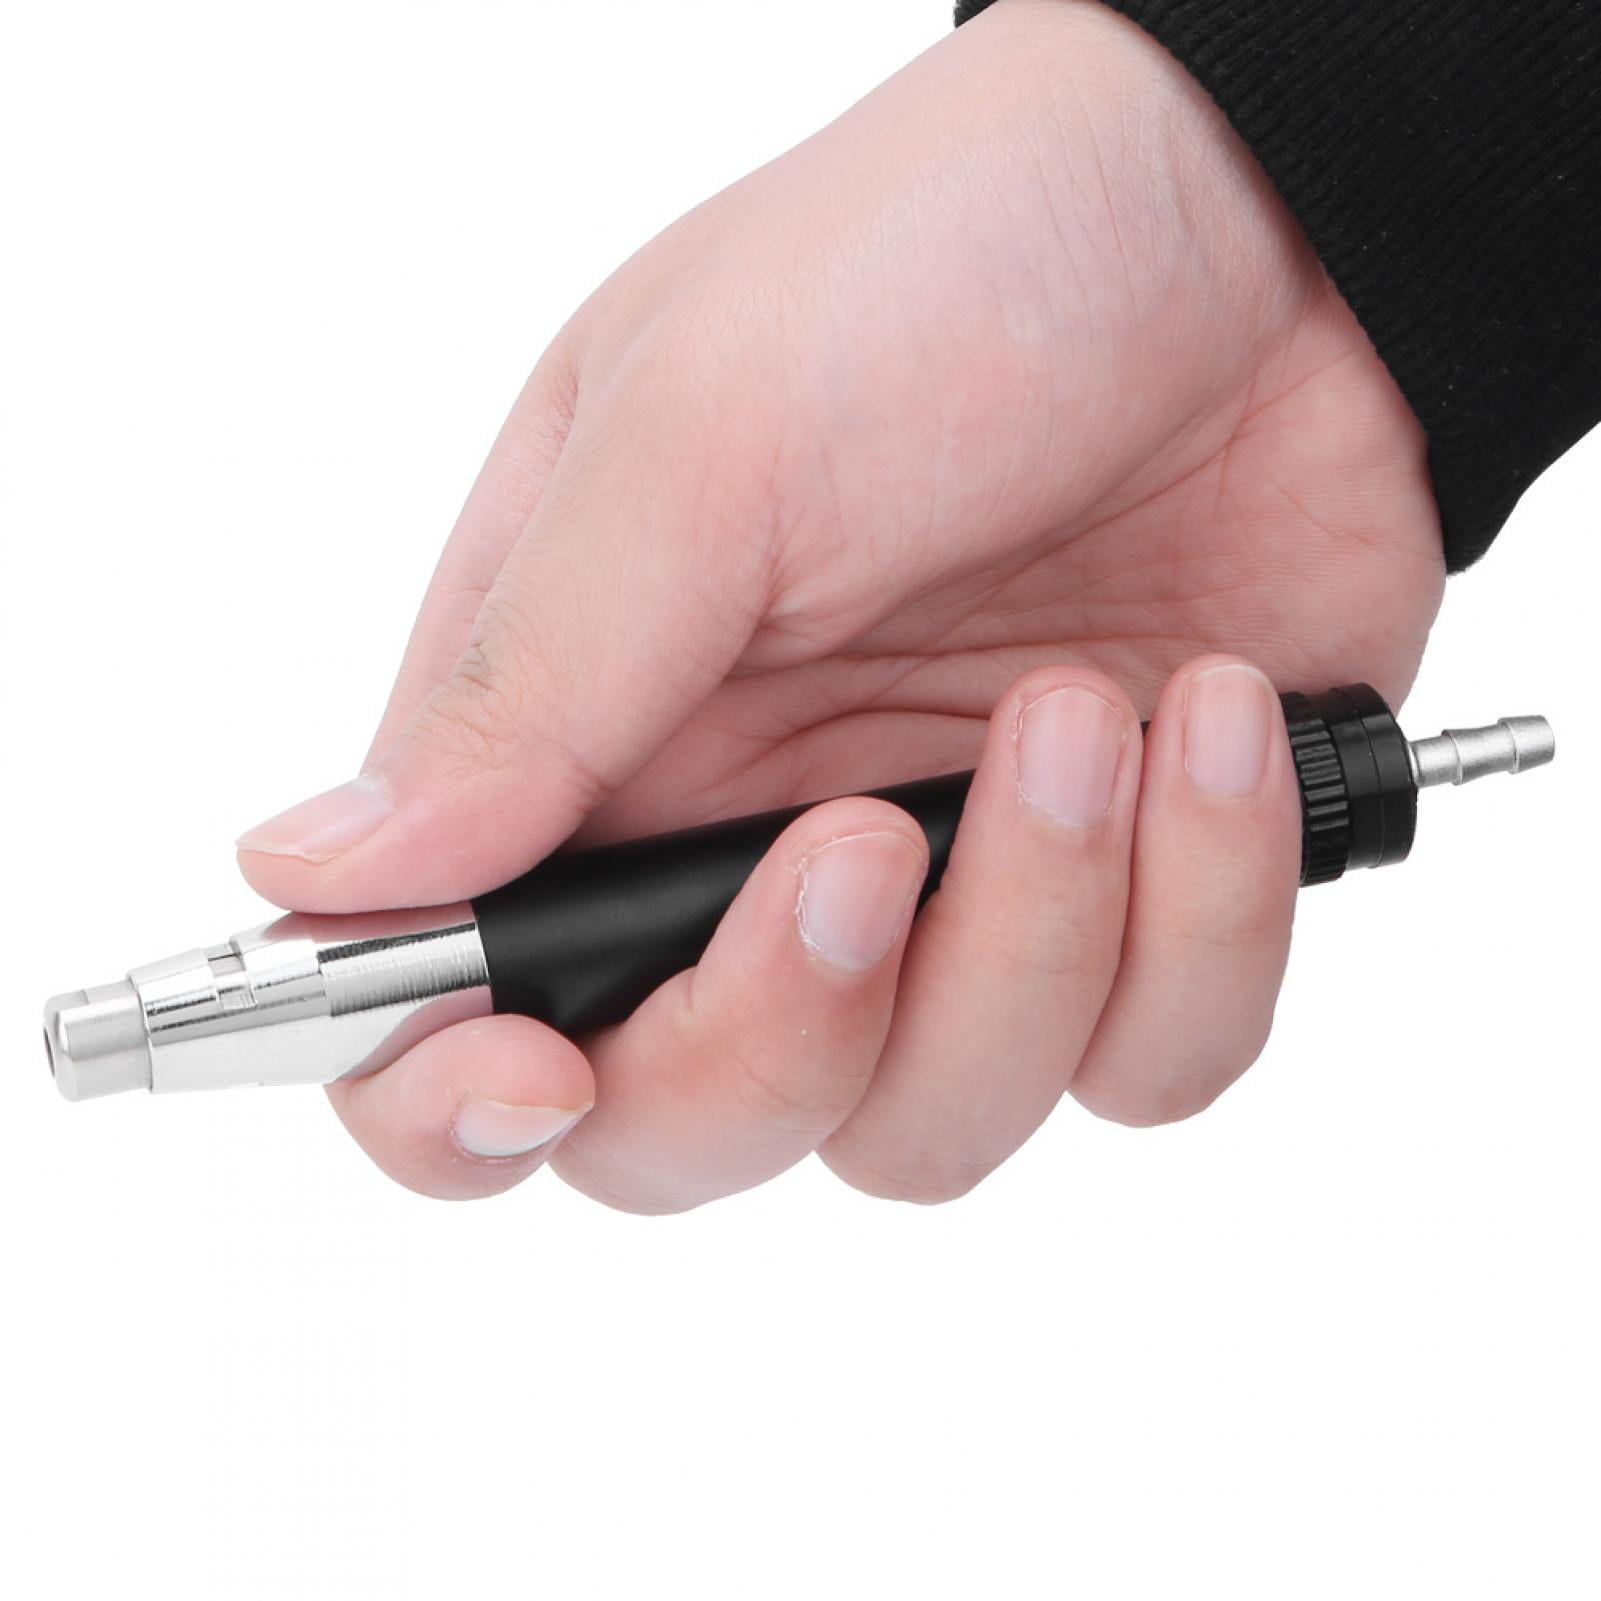 Pneumatic Chuck Block Straight Air Grinding Pen For Carved Power Players  And Engraving, Grinder And Polishing From Dicas, $87.75